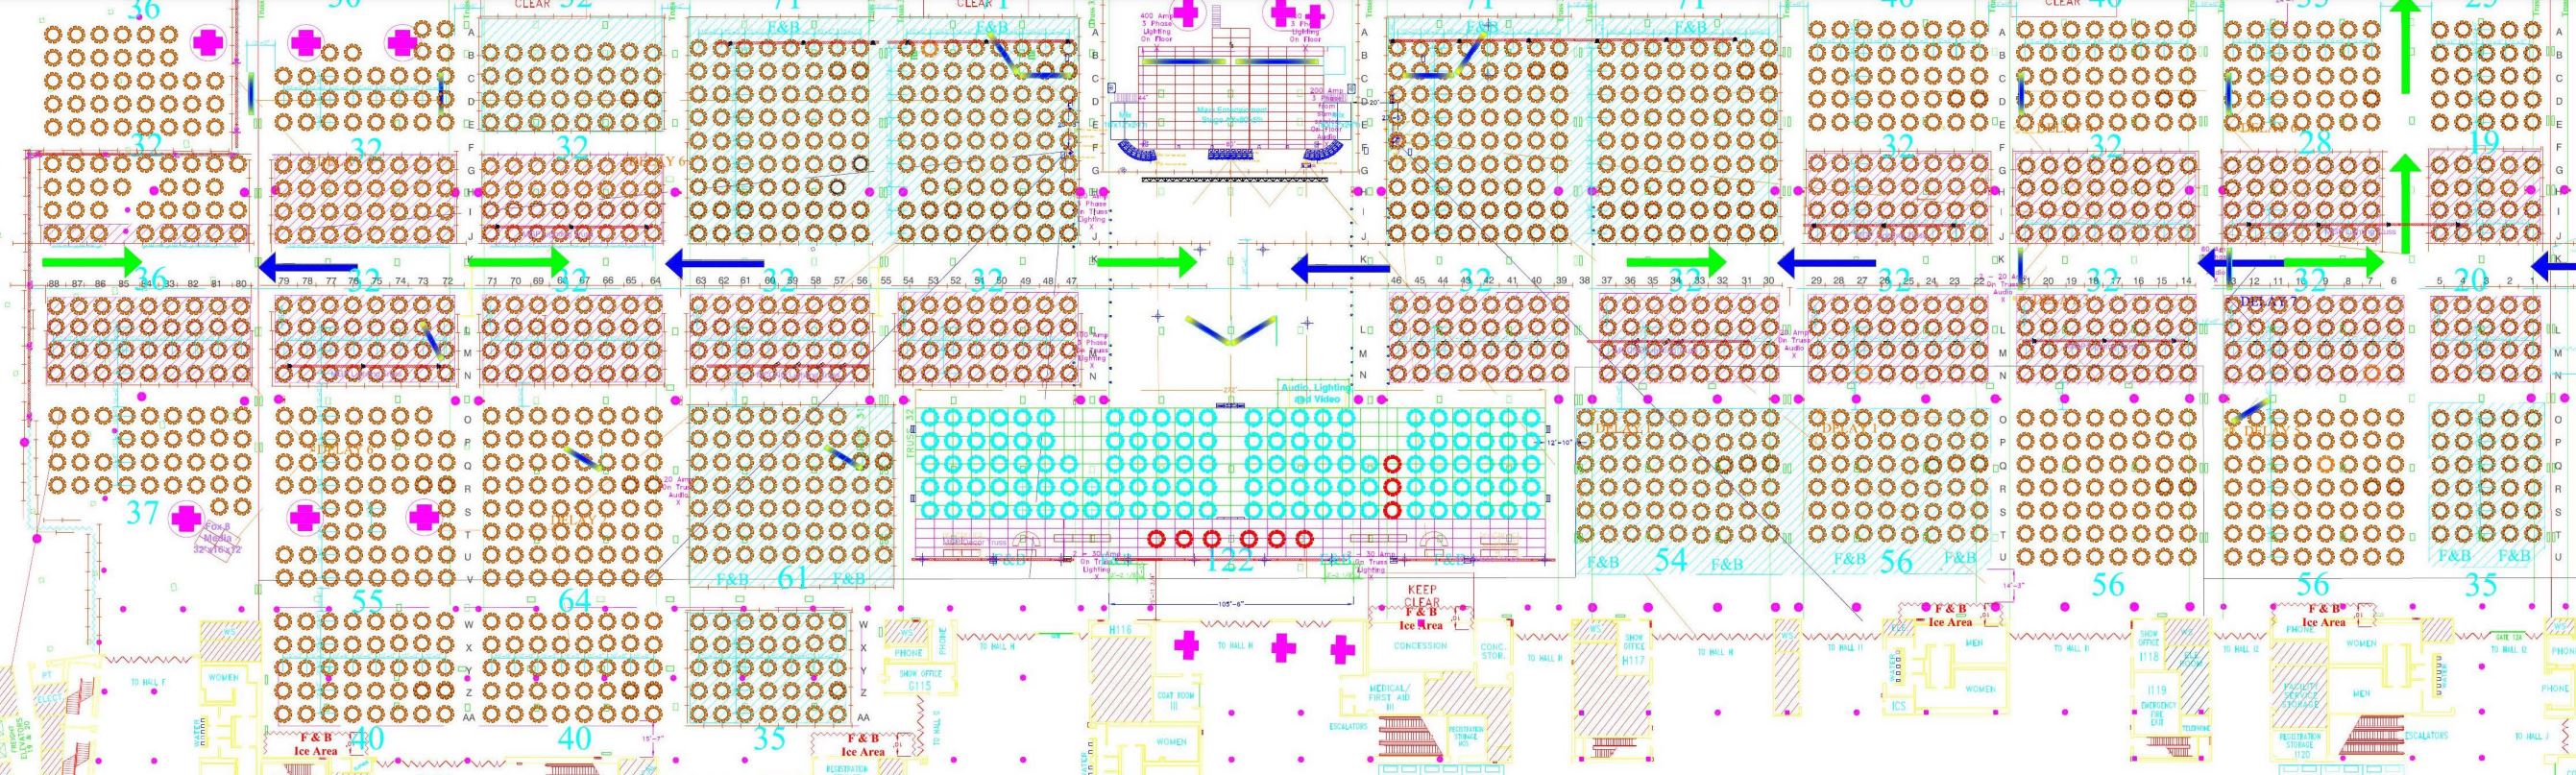 Endymion Seating Chart